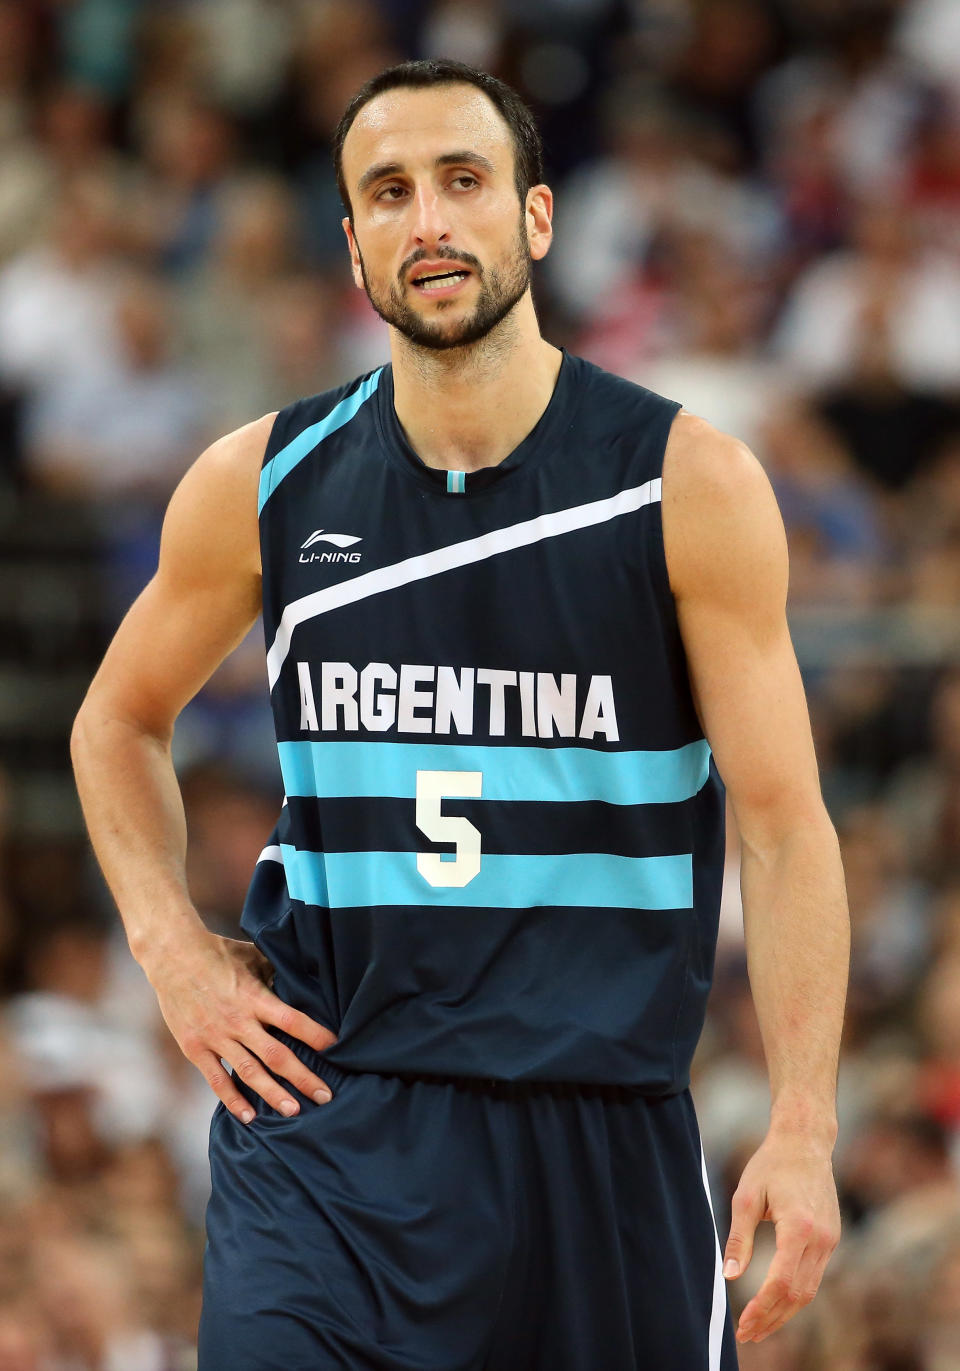 When Argentina became the first Latin American country to legalize same-sex marriage two years ago, homegrown NBA star Manu Ginobili <a href="http://outsports.com/jocktalkblog/2010/07/16/manu-ginobli-supports-gay-marriage/">threw in his support.</a>